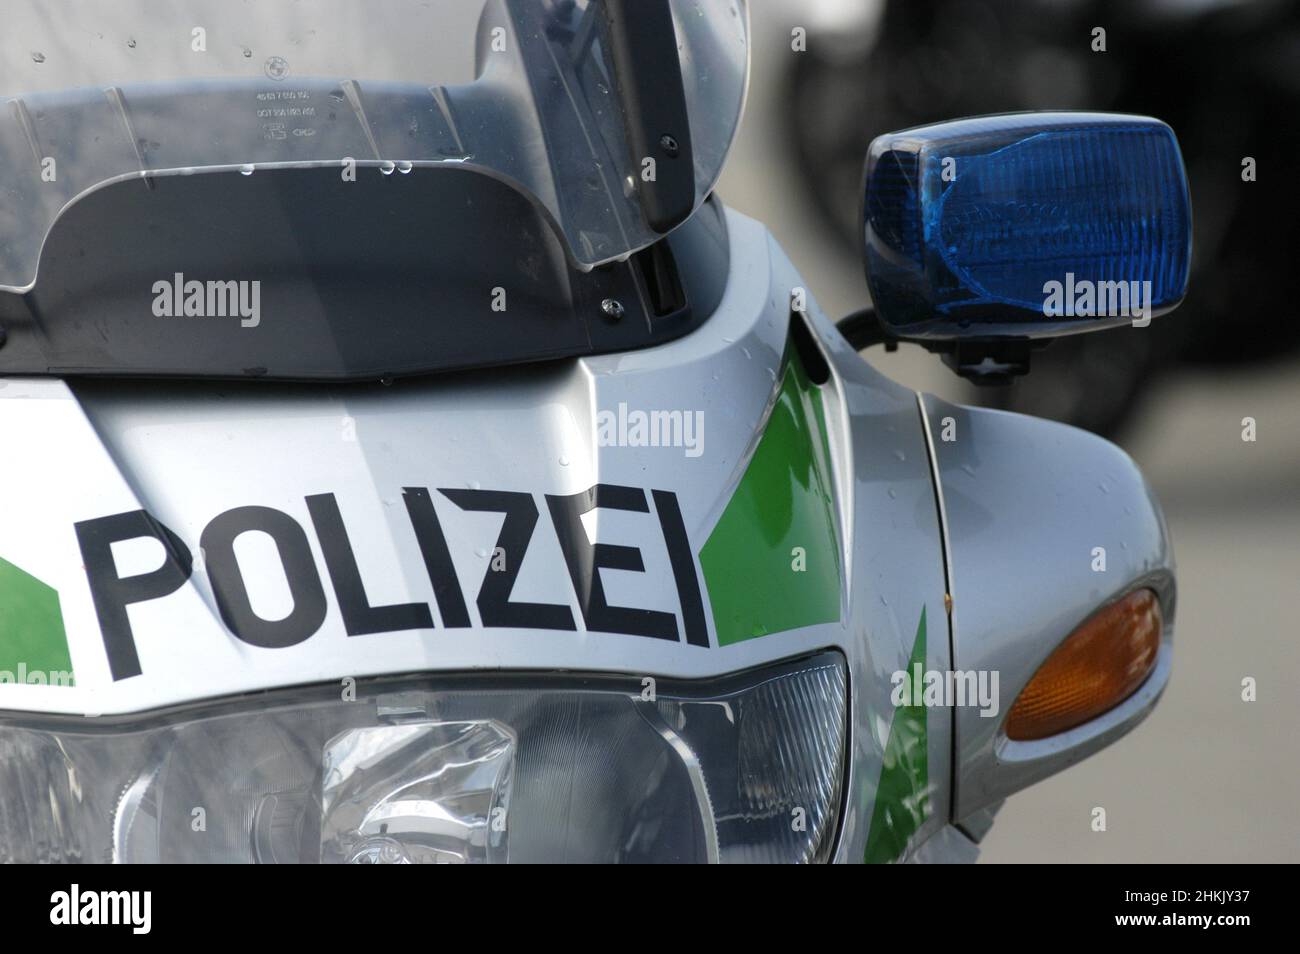 police motorcycle with blue light direction indicator, Germany Stock Photo